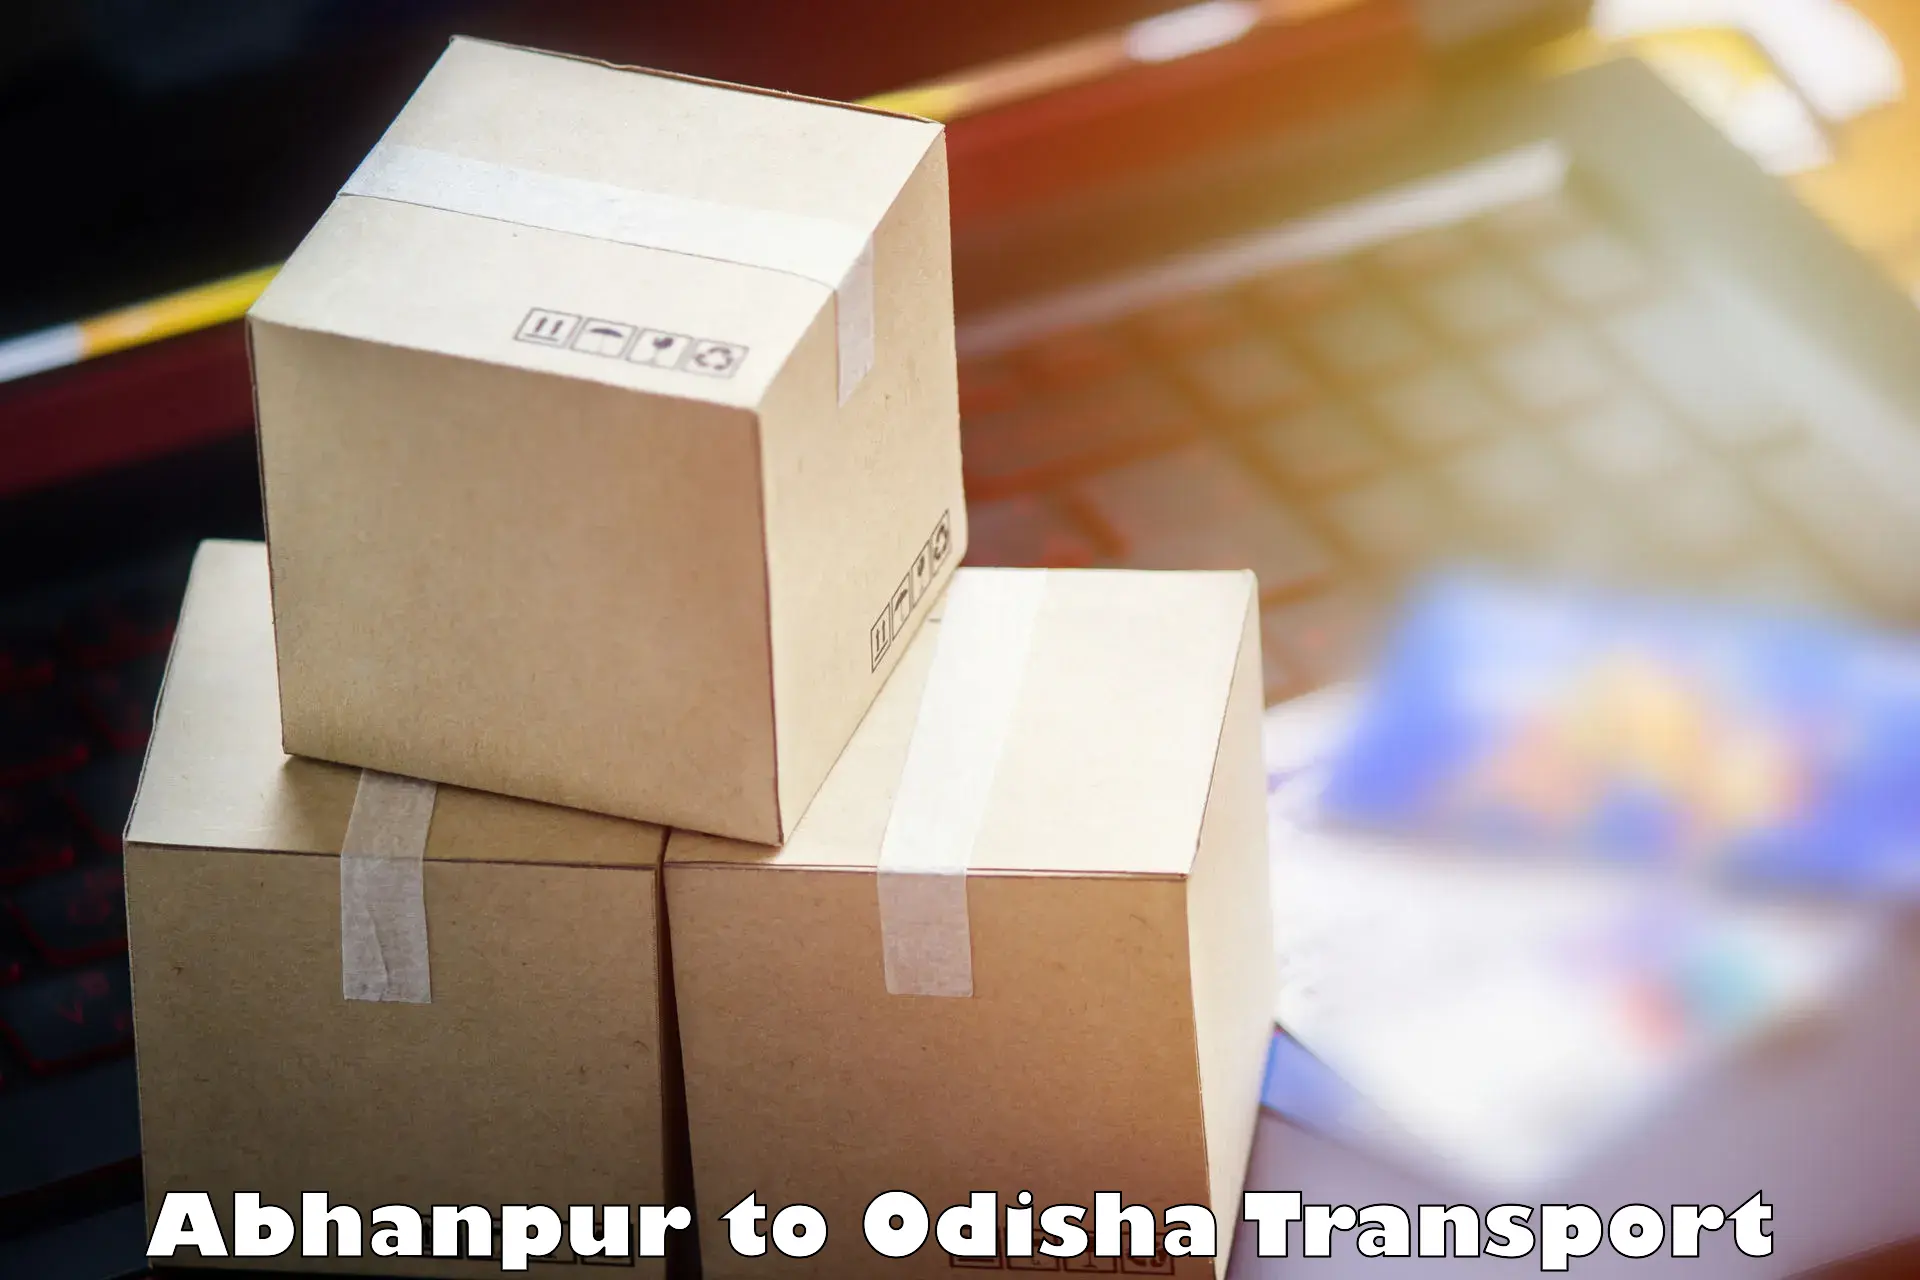 Cargo train transport services Abhanpur to Chandikhol